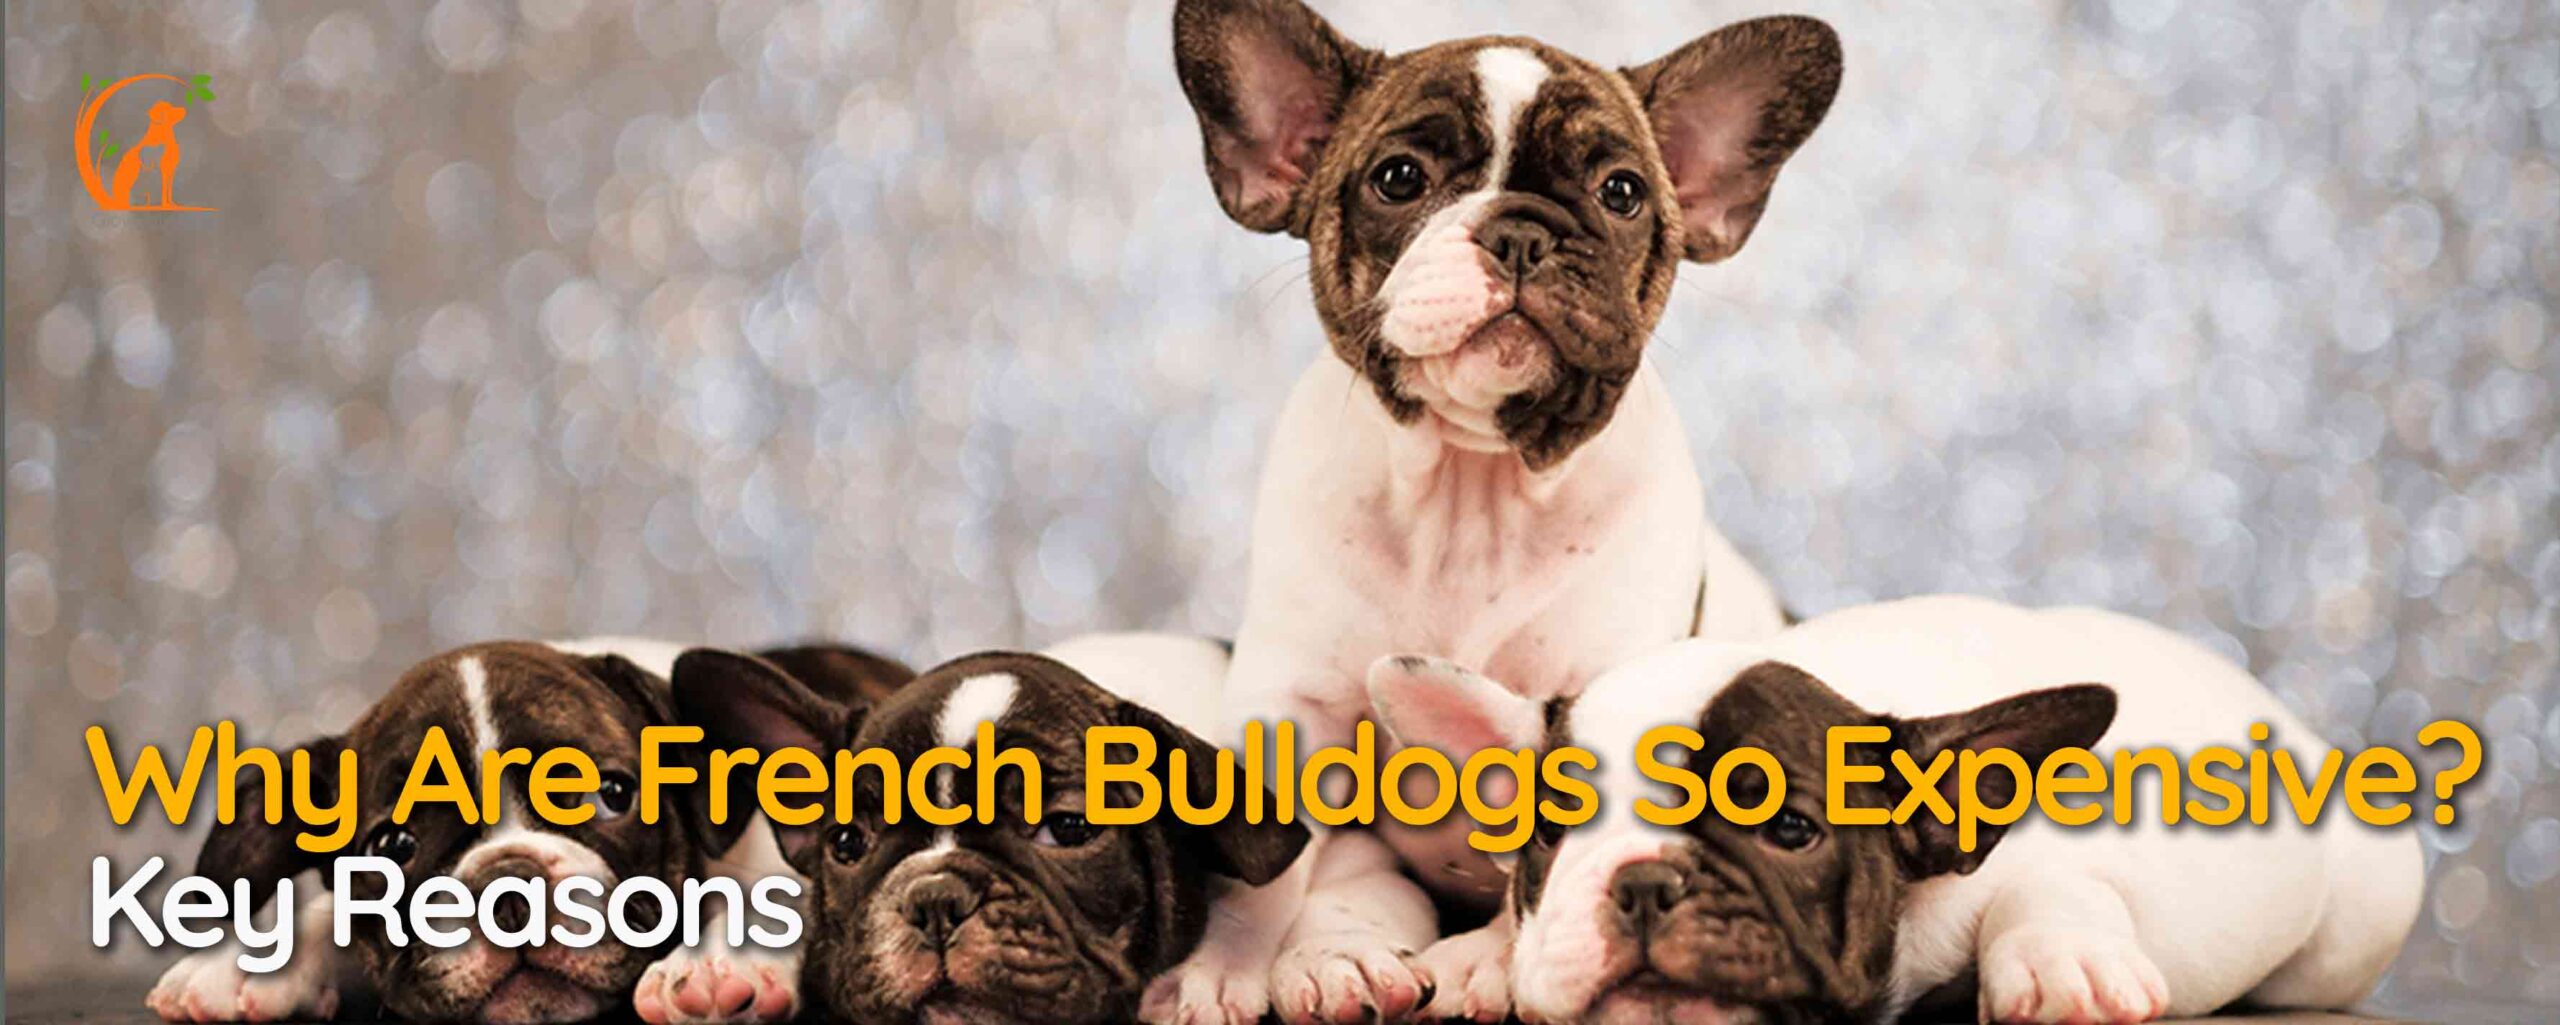 Why Are French Bulldogs So Expensive? Key Reasons